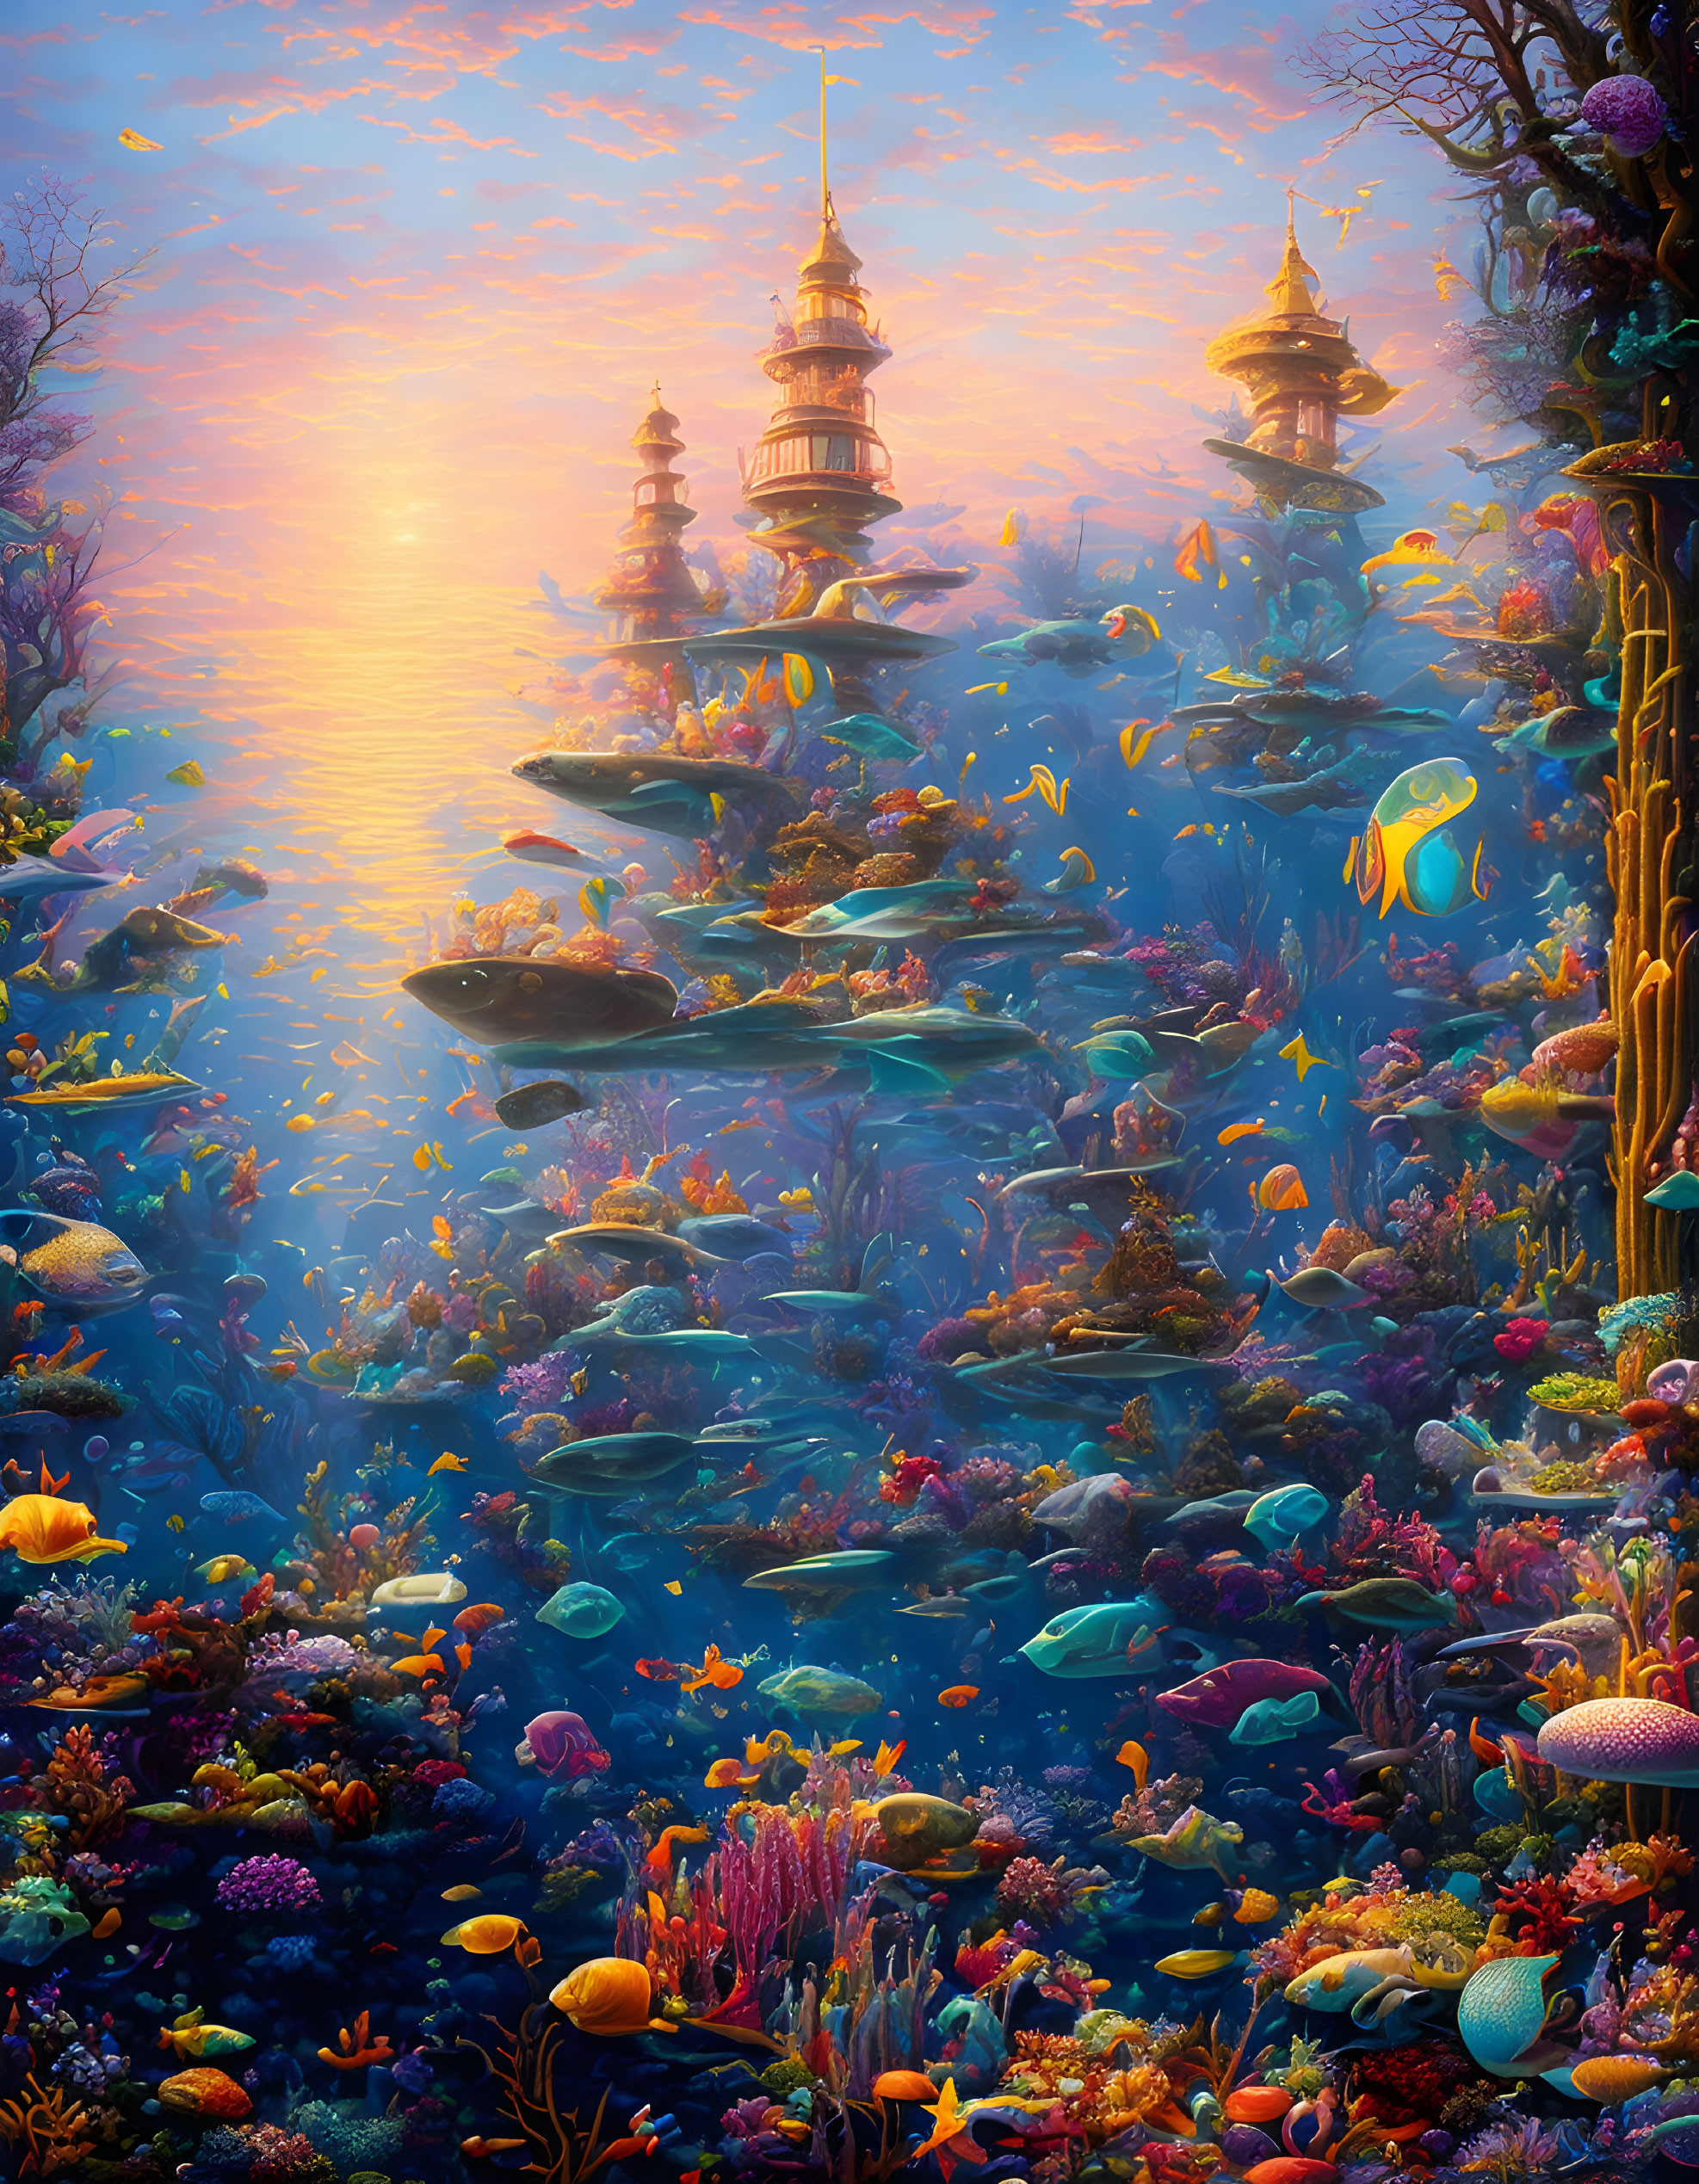 Colorful Underwater Scene with Coral, Fish, and Towers at Sunset